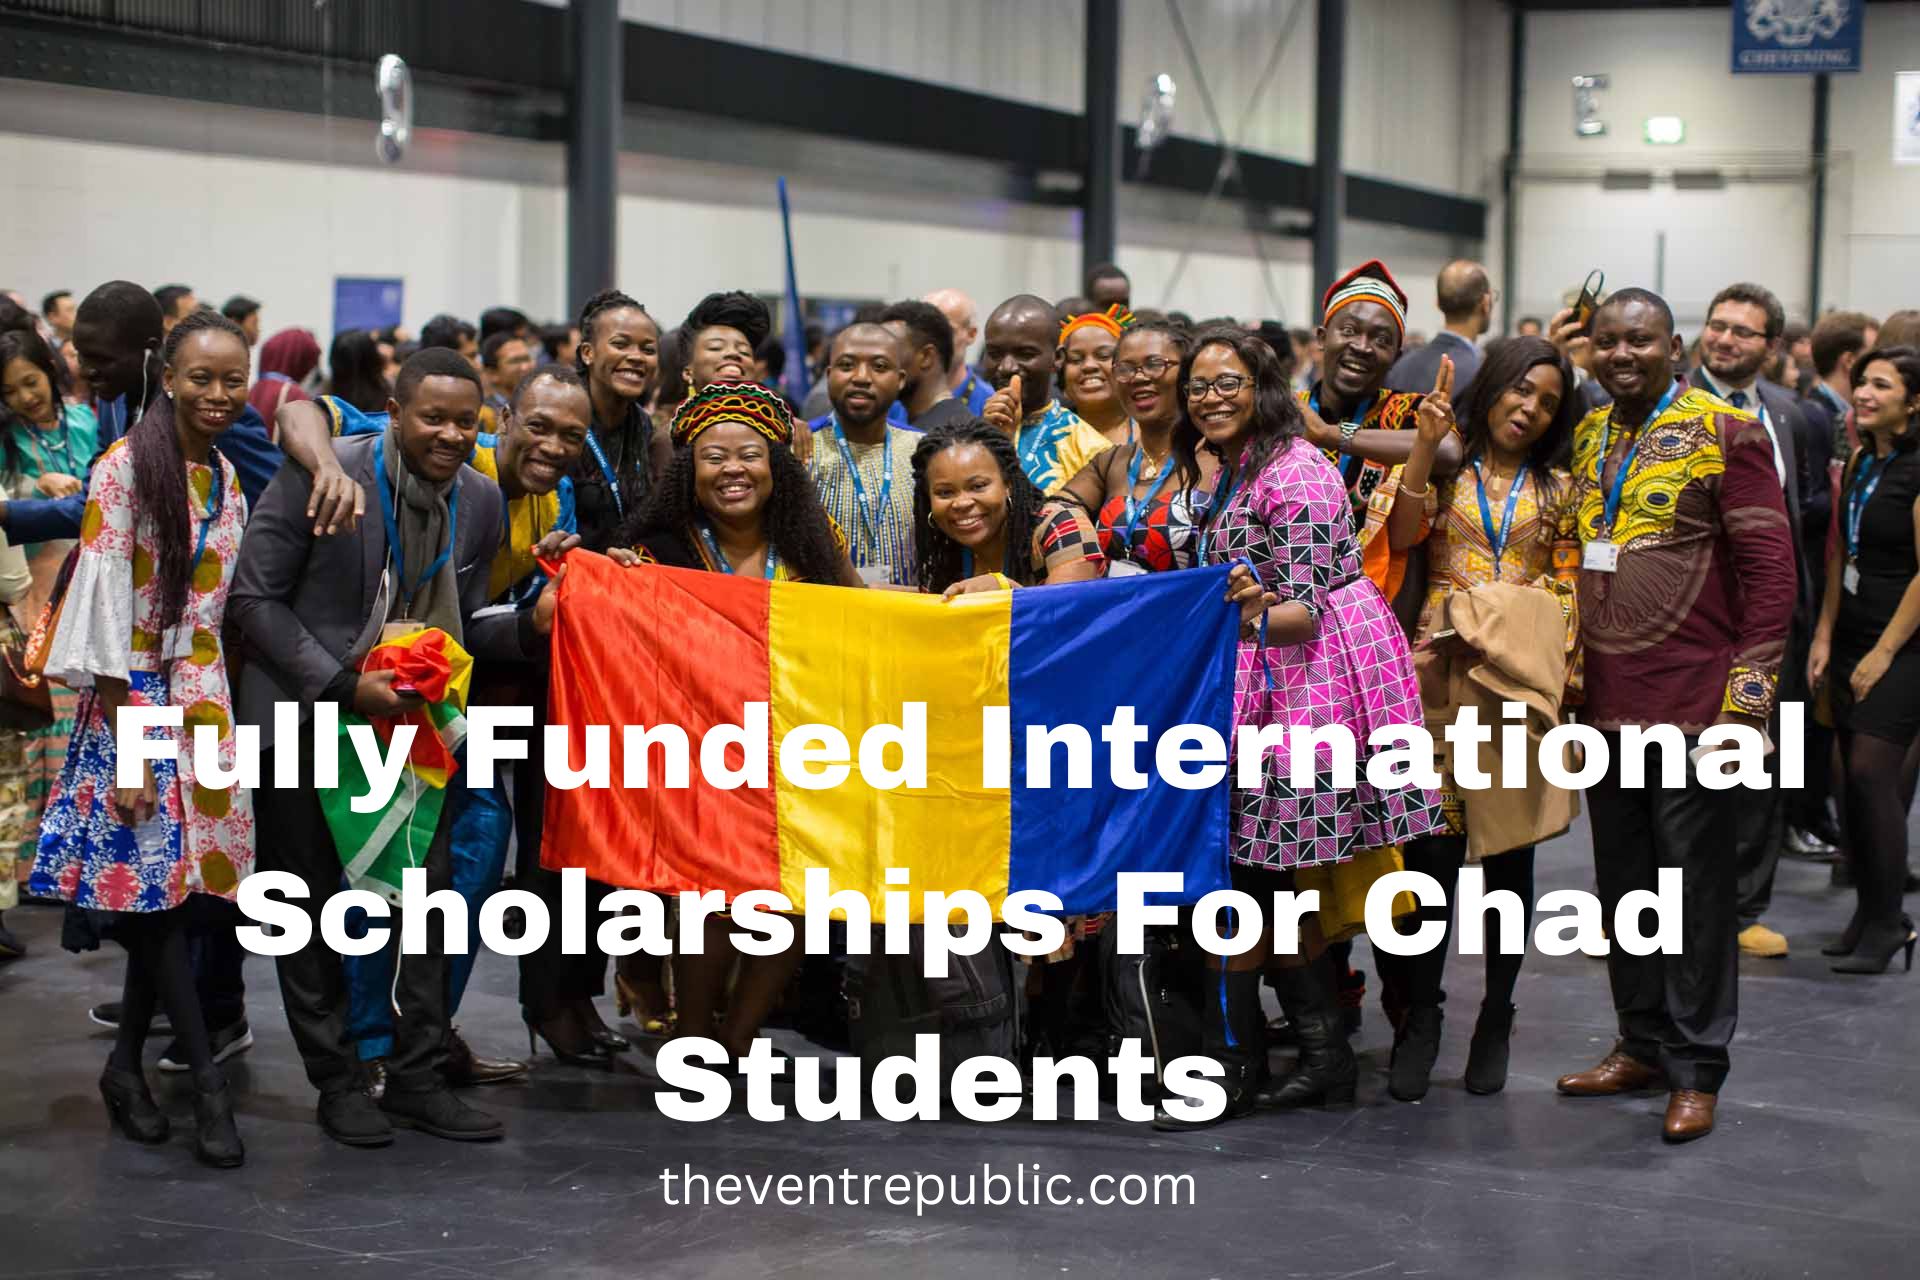 Fully Funded International Scholarships For Chad Students